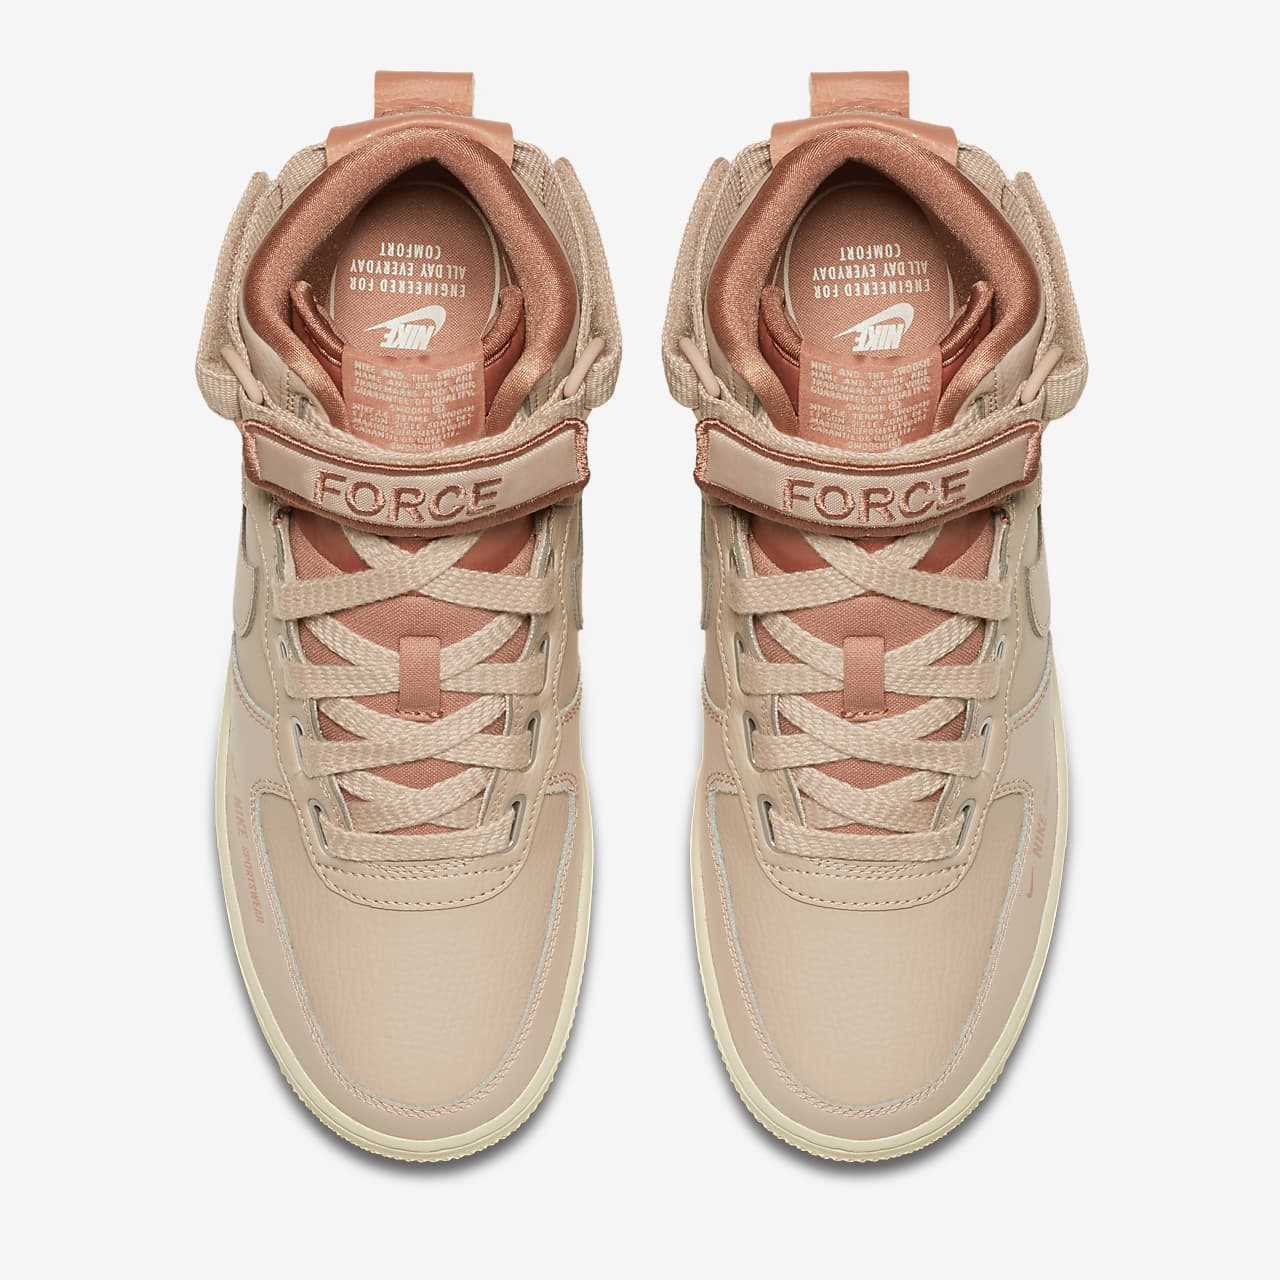 nike air force 1 high utility particle beige women's shoe